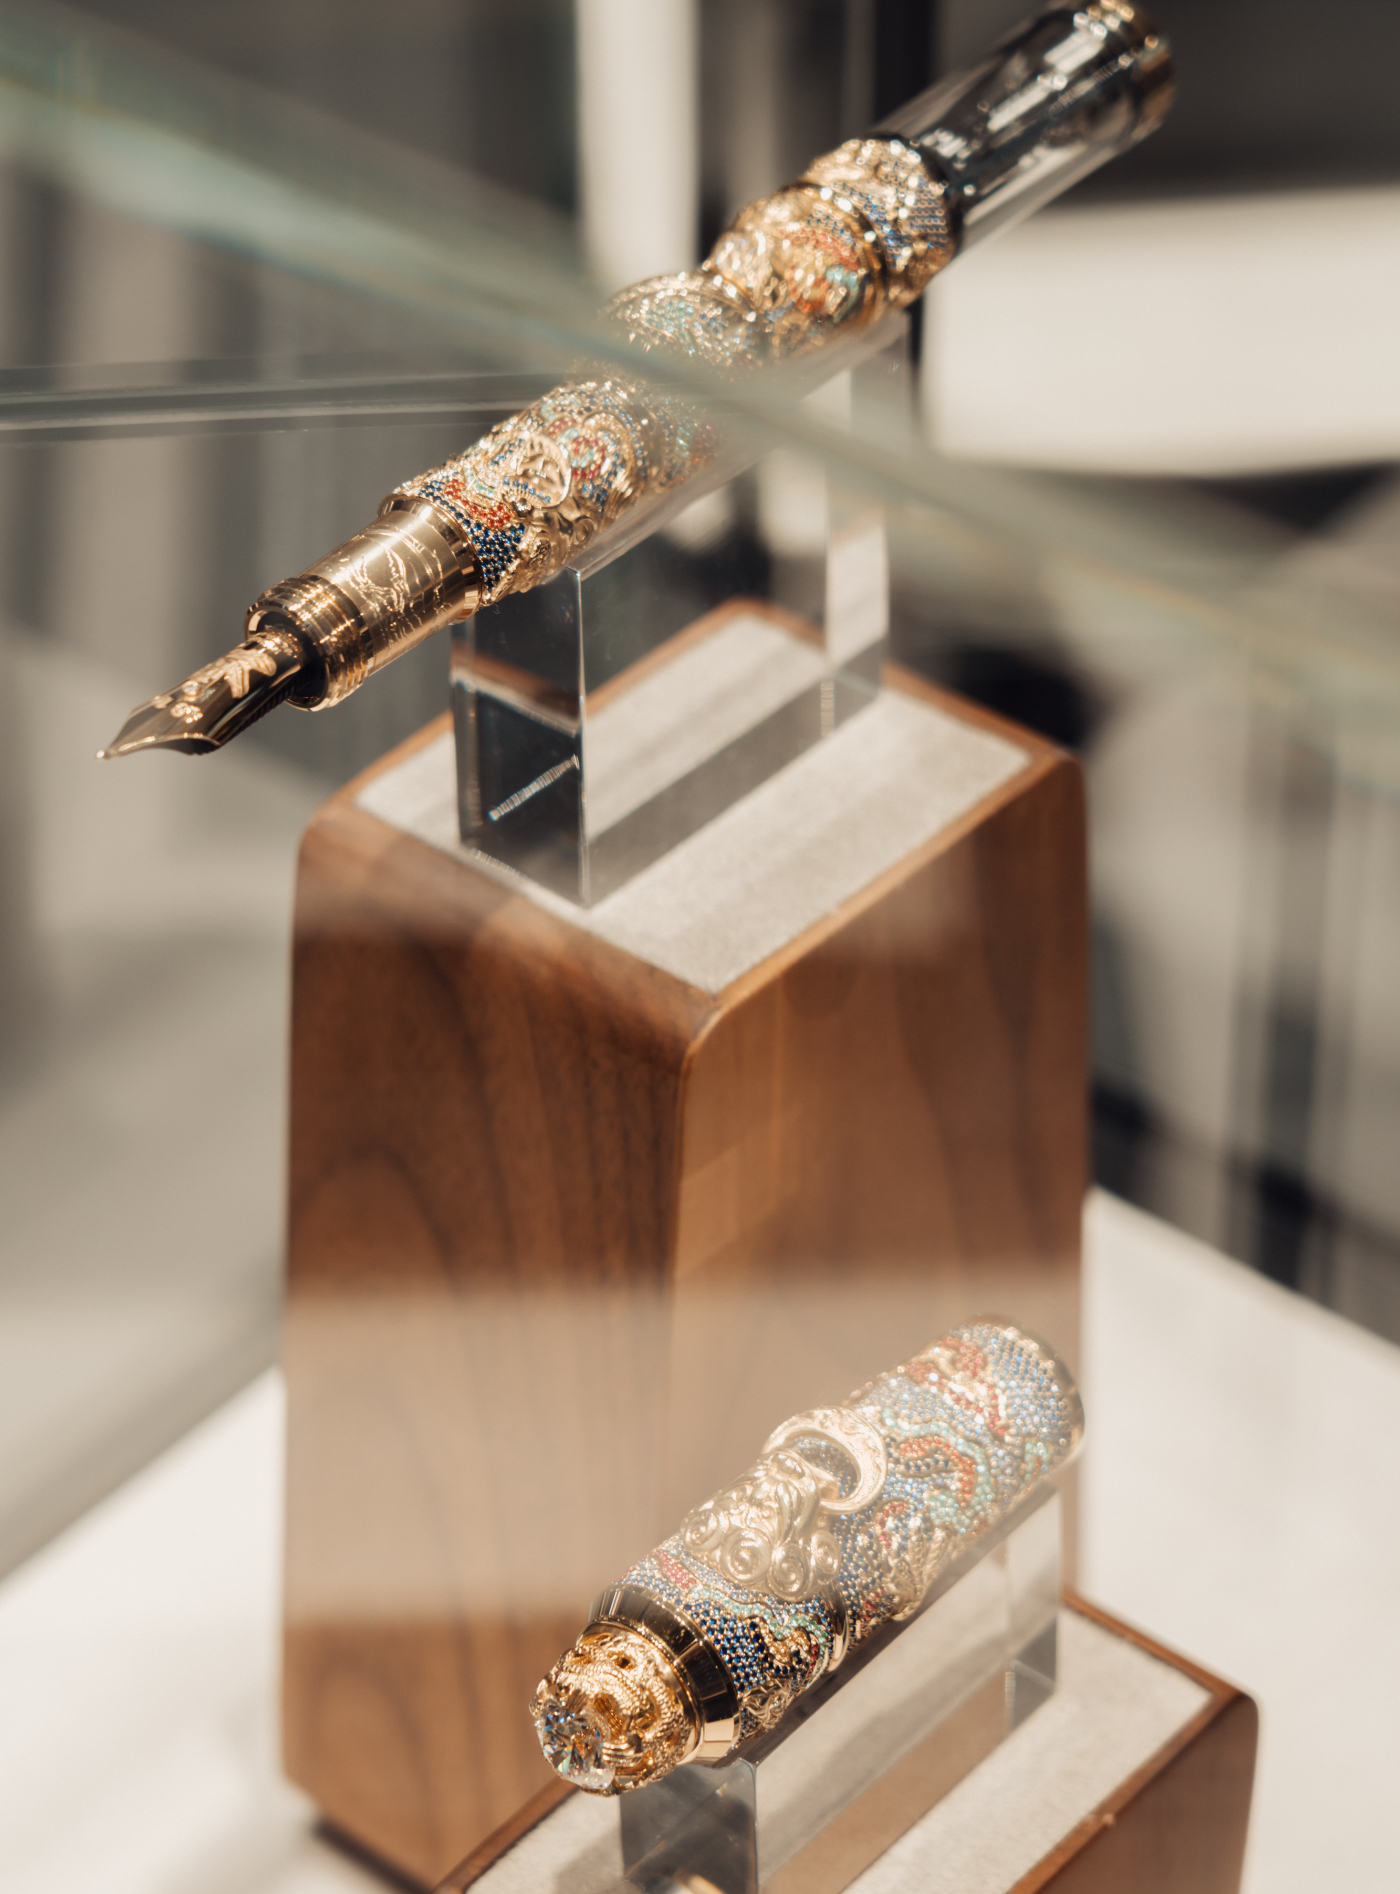 Montblanc High Artistry: A Tribute to the Great Wall of China